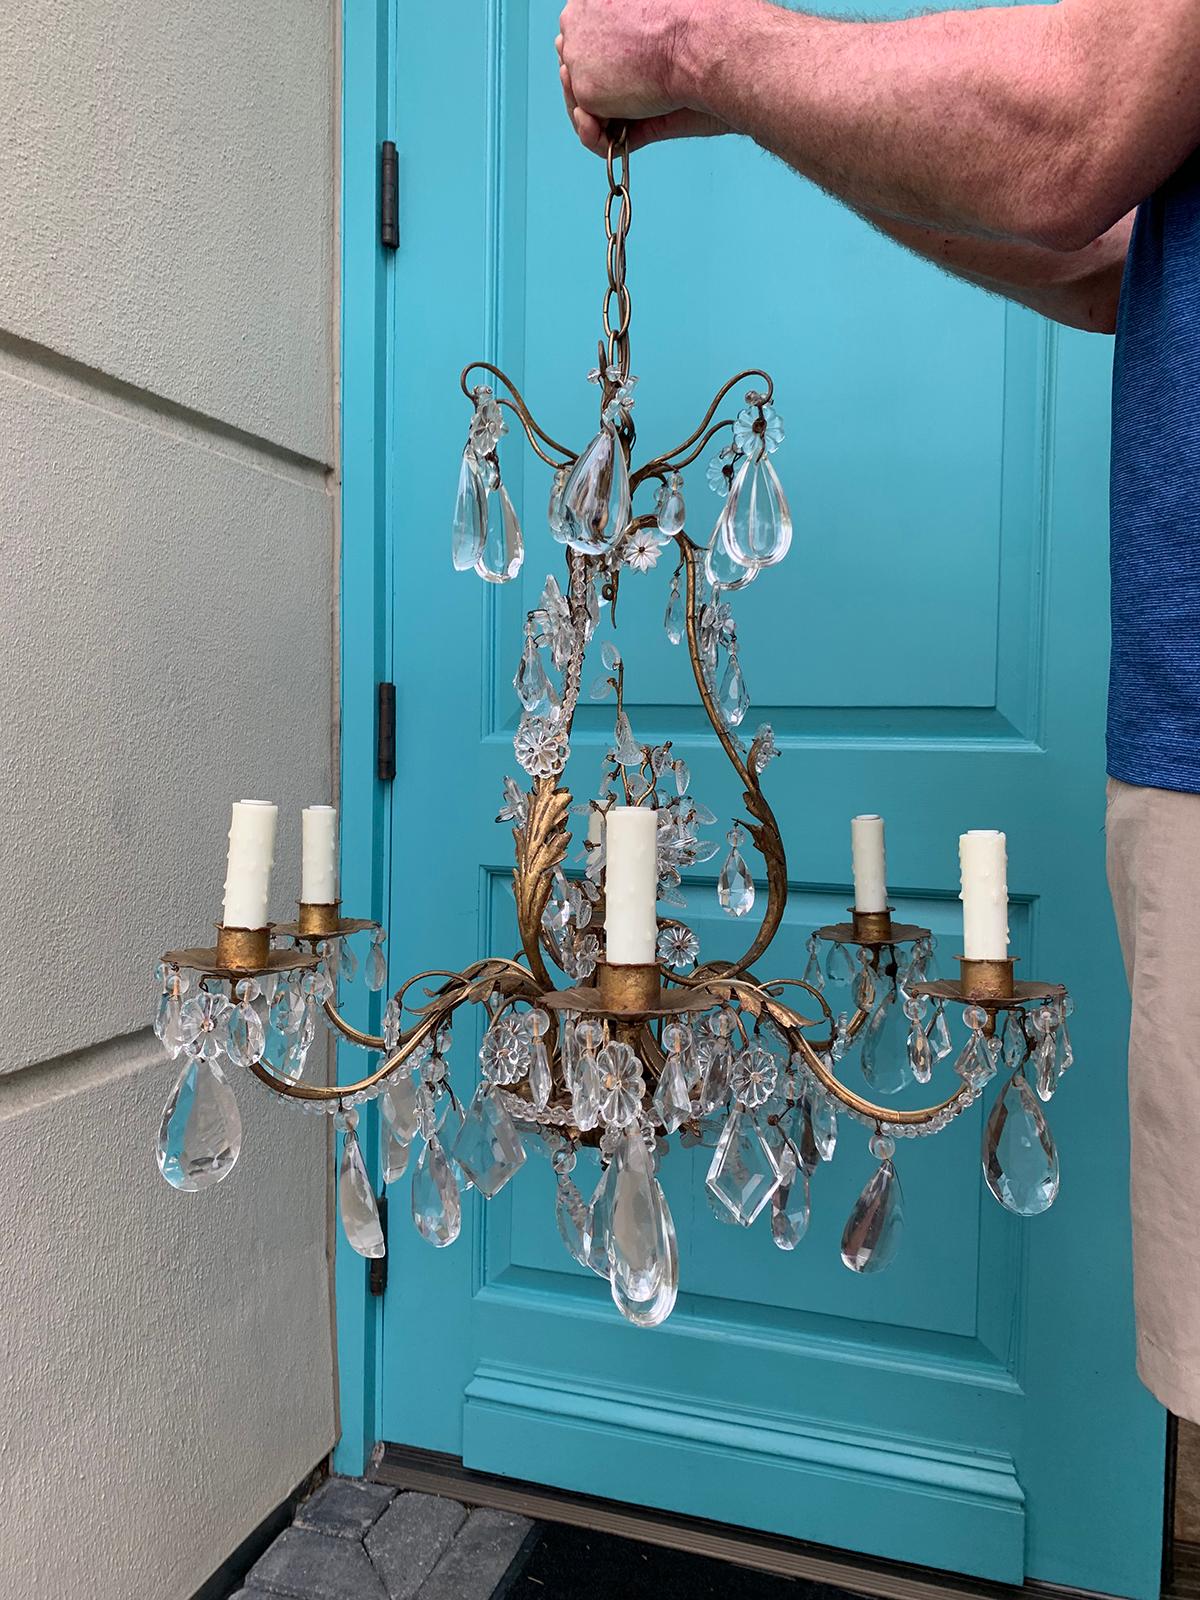 20th century crystal six-arm chandelier attributes to Maison Bagues
Brand new wiring
Crystal prisms are clear - turquoise shown is a reflection of our front door.